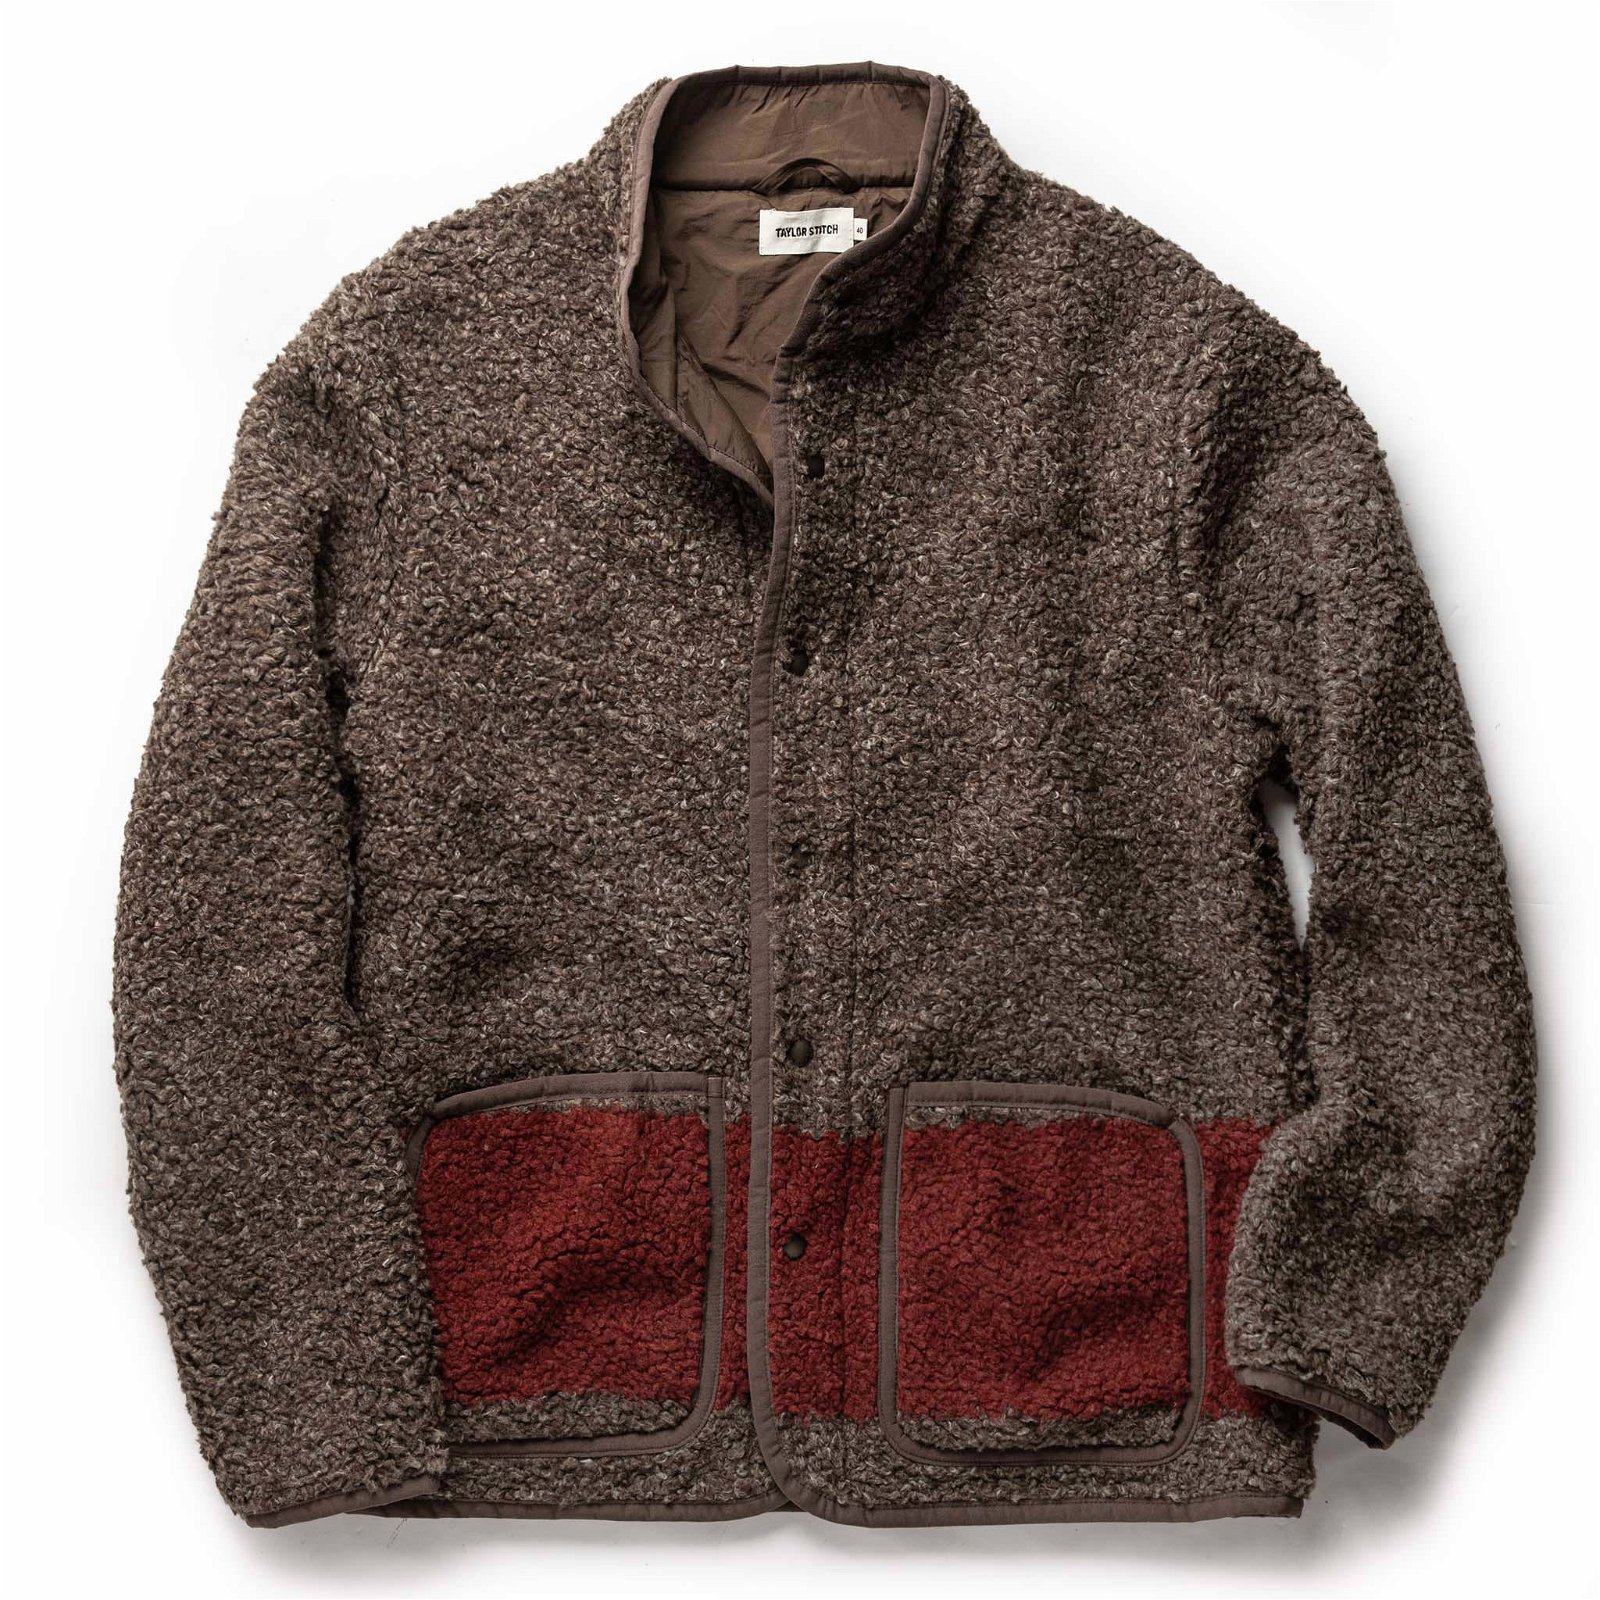 Image of The Port Jacket in Espresso Marl